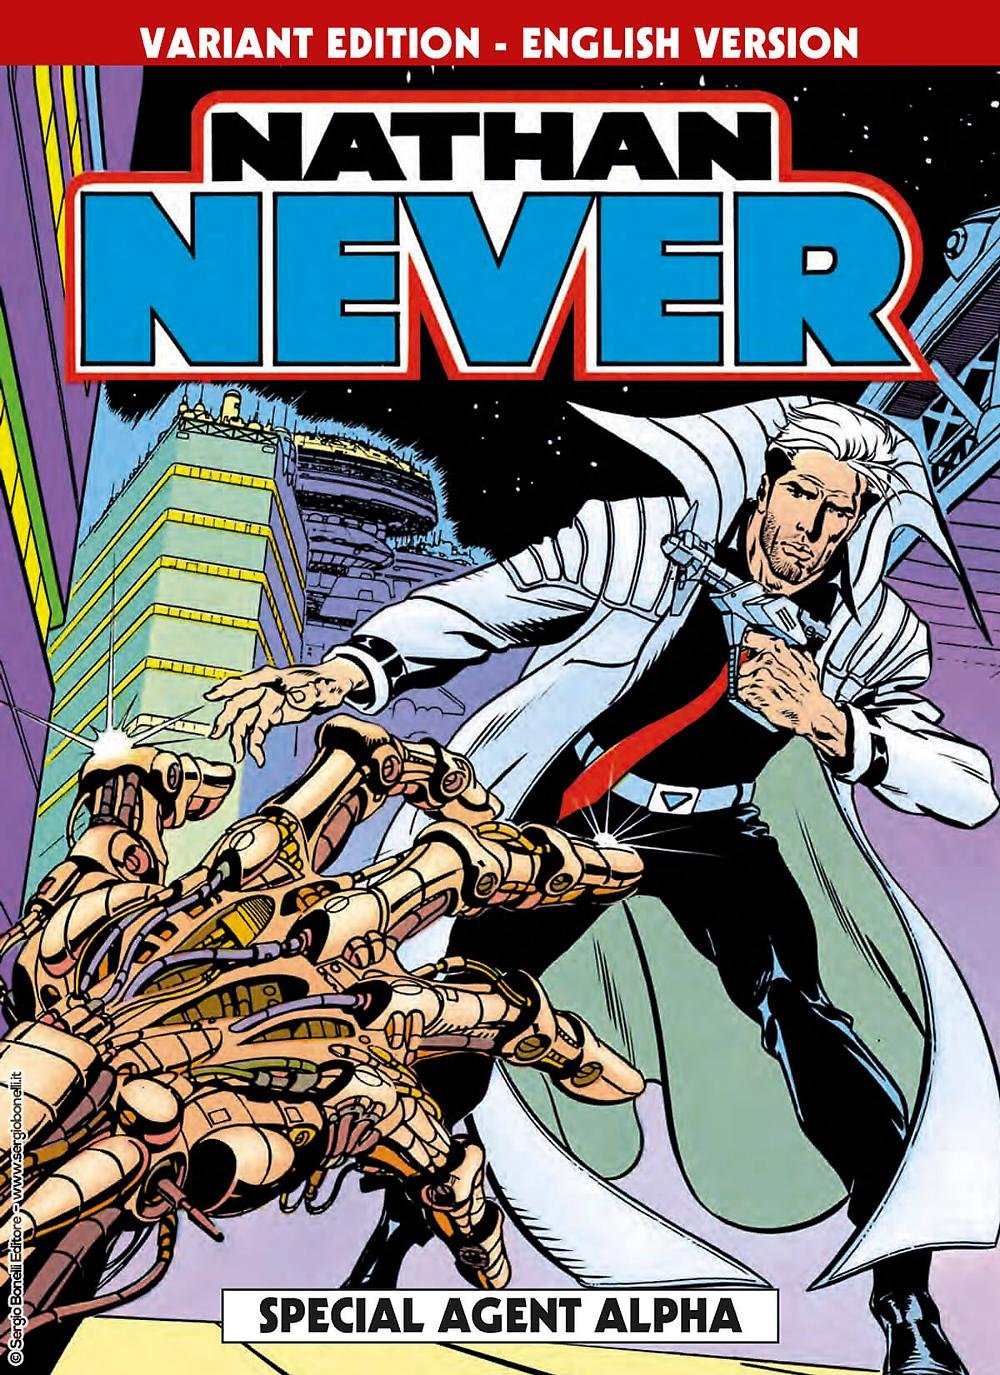 NATHAN NEVER 1 VARIANT LUCCA 2023 SPECIAL AGENT ALPHA (INGLESE)